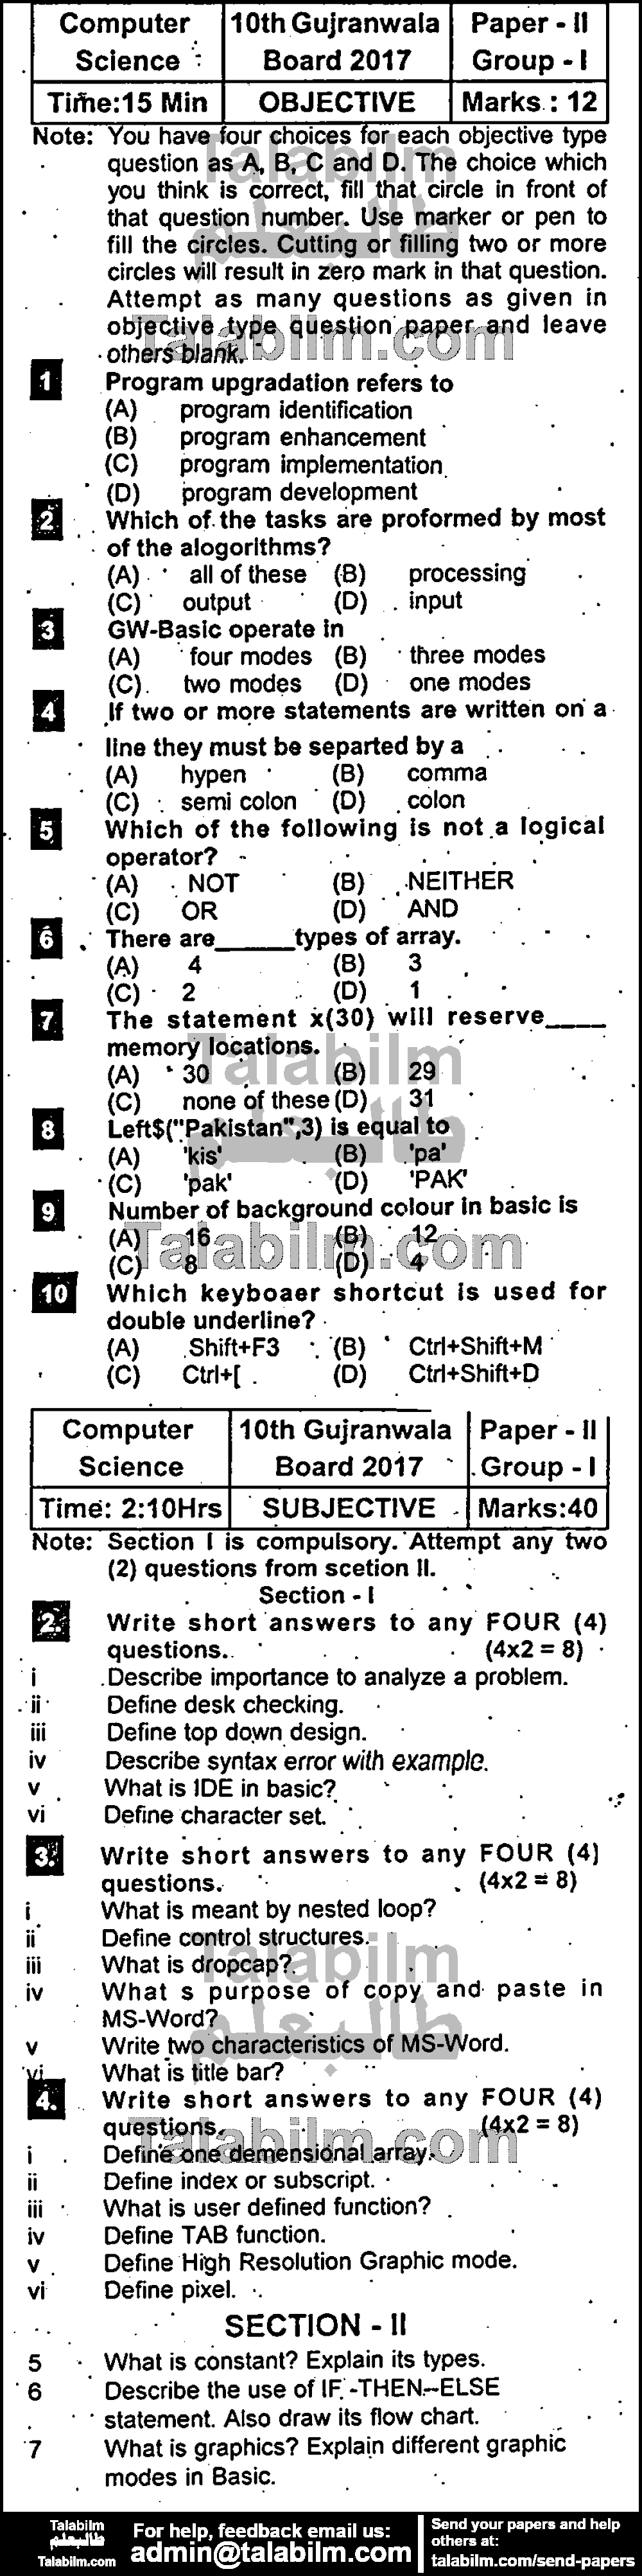 Computer Science 0 past paper for 2017 Group-I